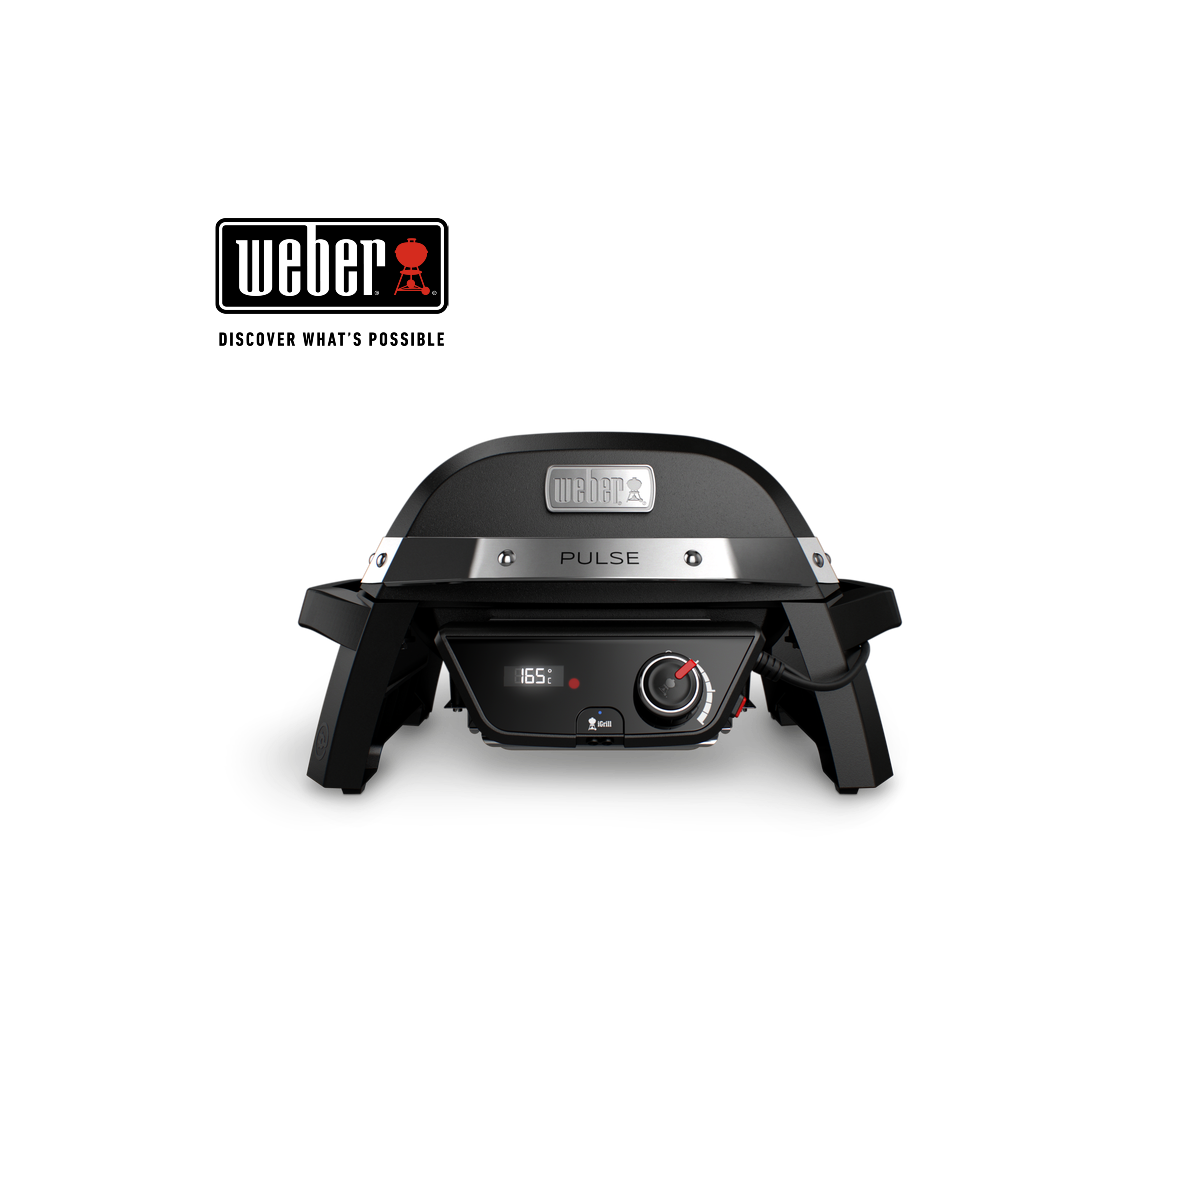 WEBER electric grill PULSE 1000, 81010069